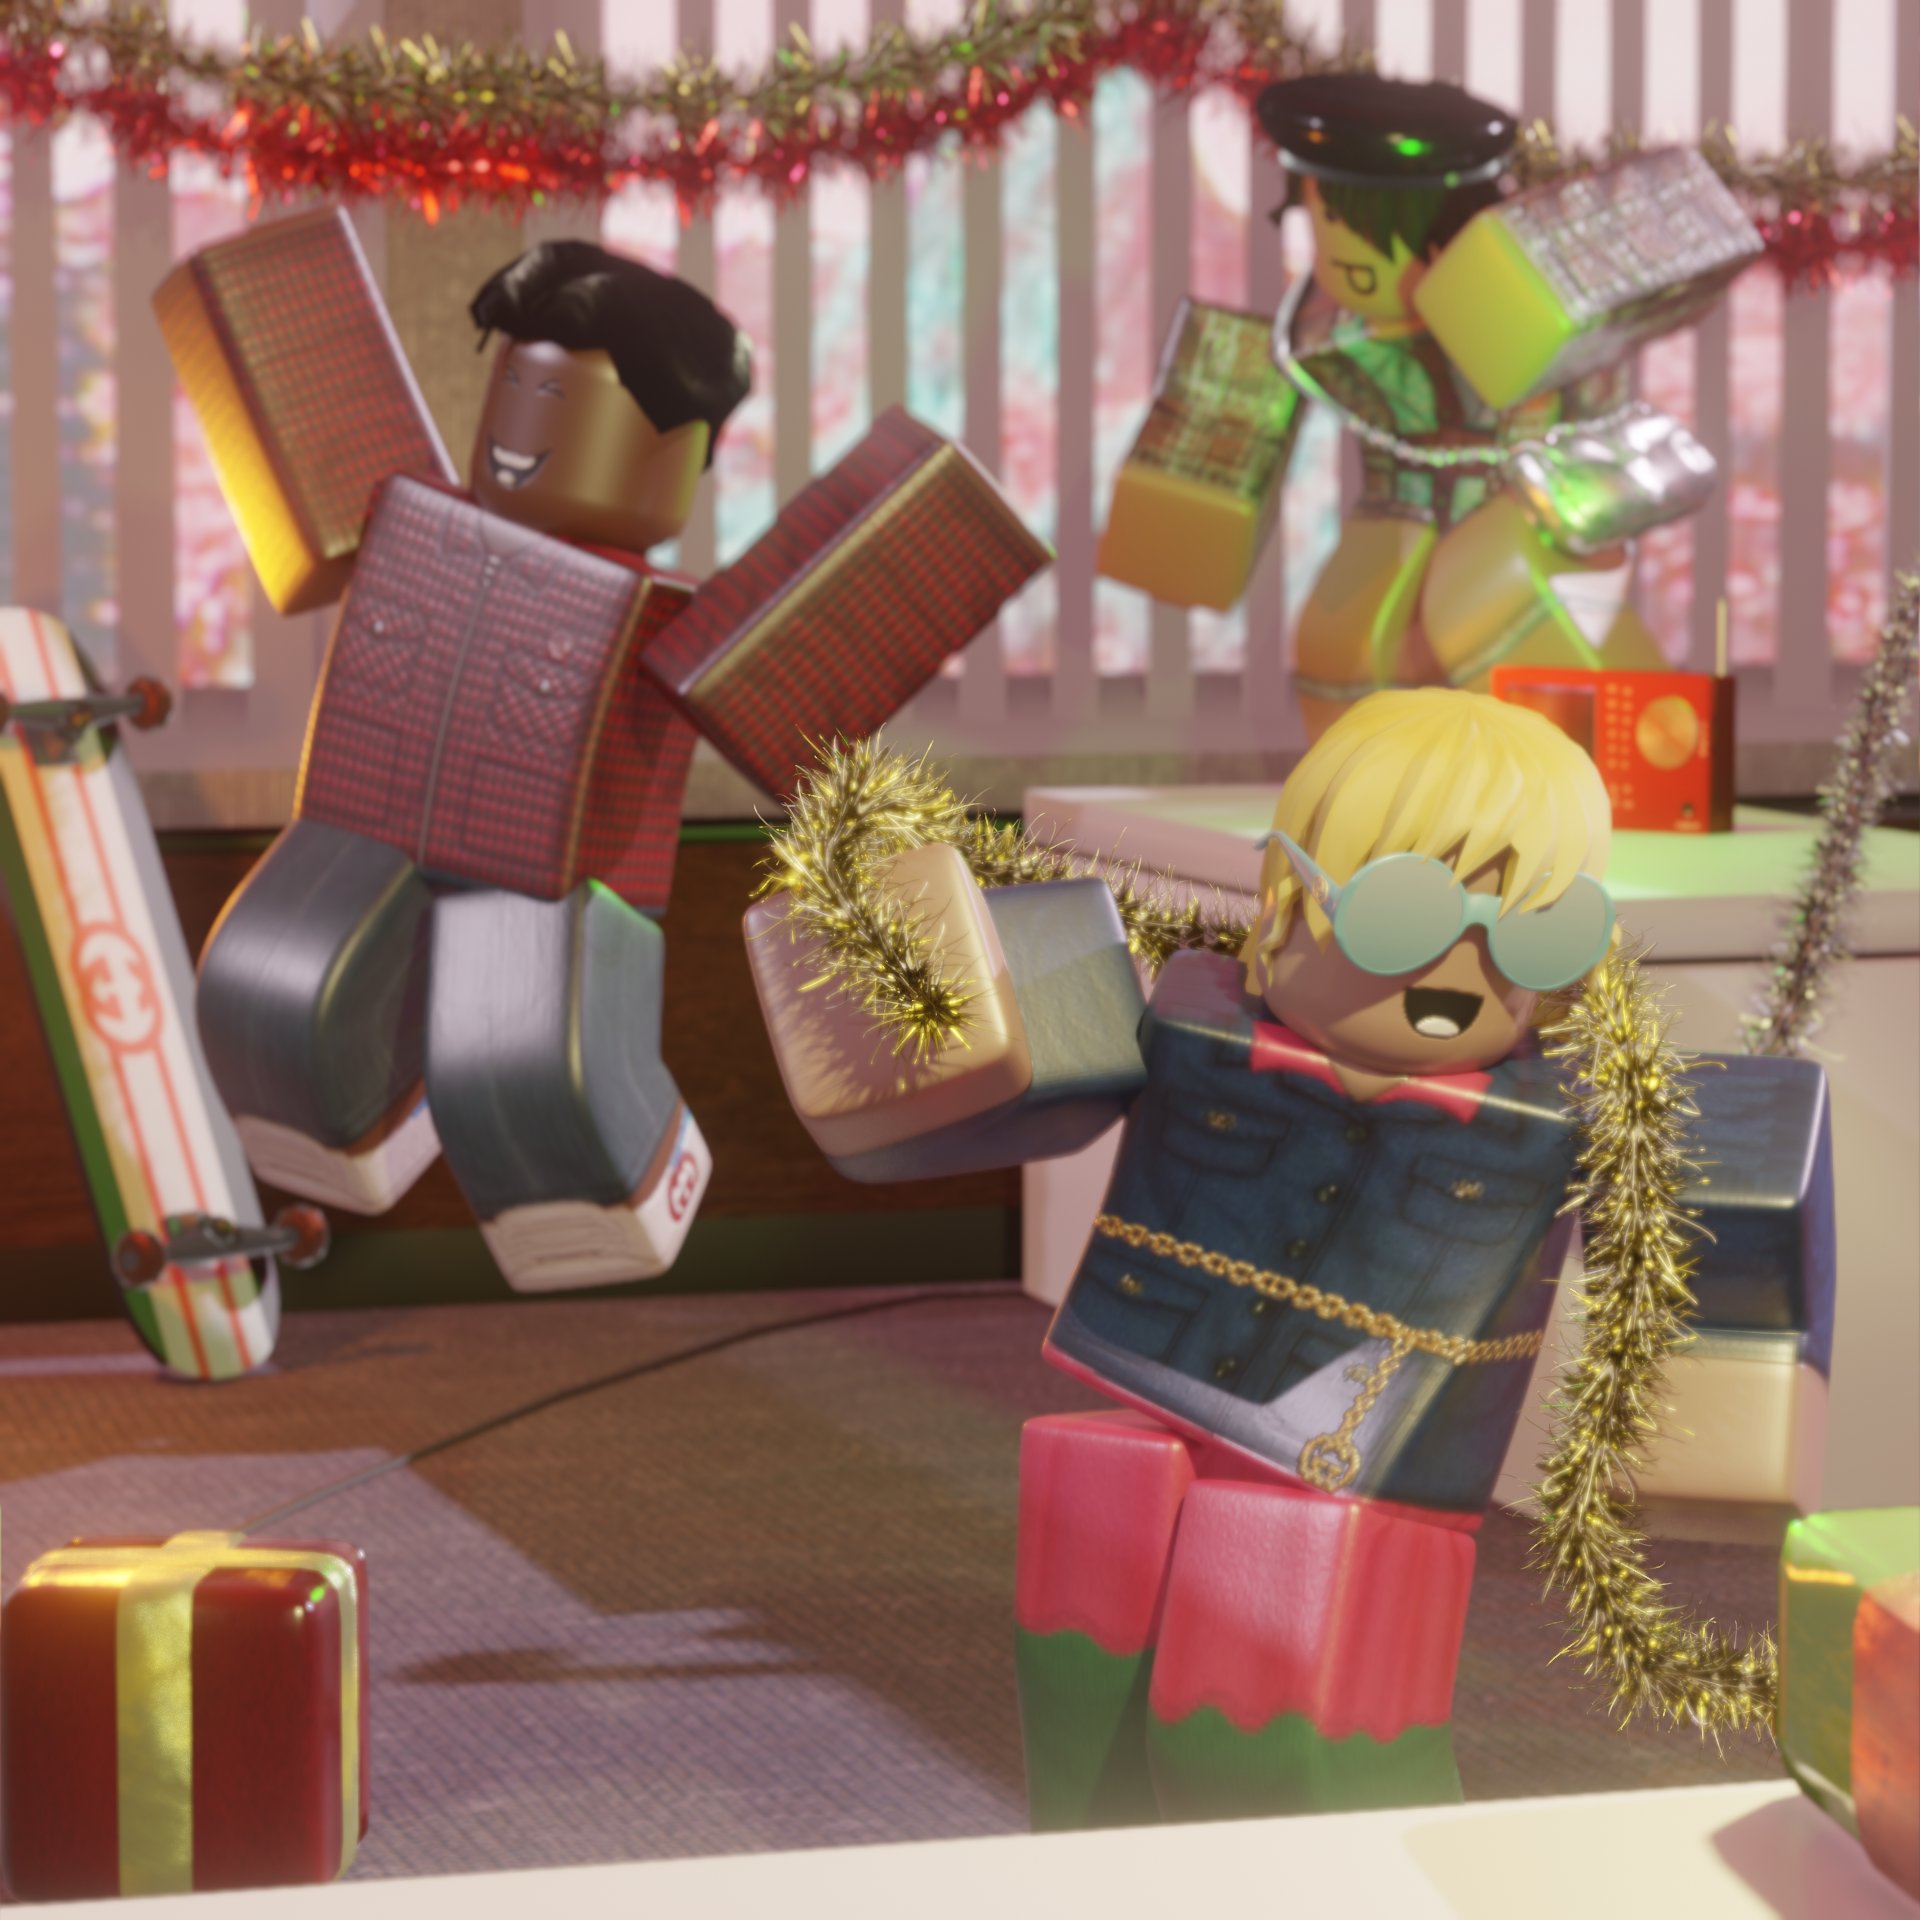 gucci on Twitter: "Roblox players @cSapphireCS @RookVanguard recreated items from the #GucciGift collection. Discover the virtual collection available now https://t.co/zV1qiMbkaD. / Twitter